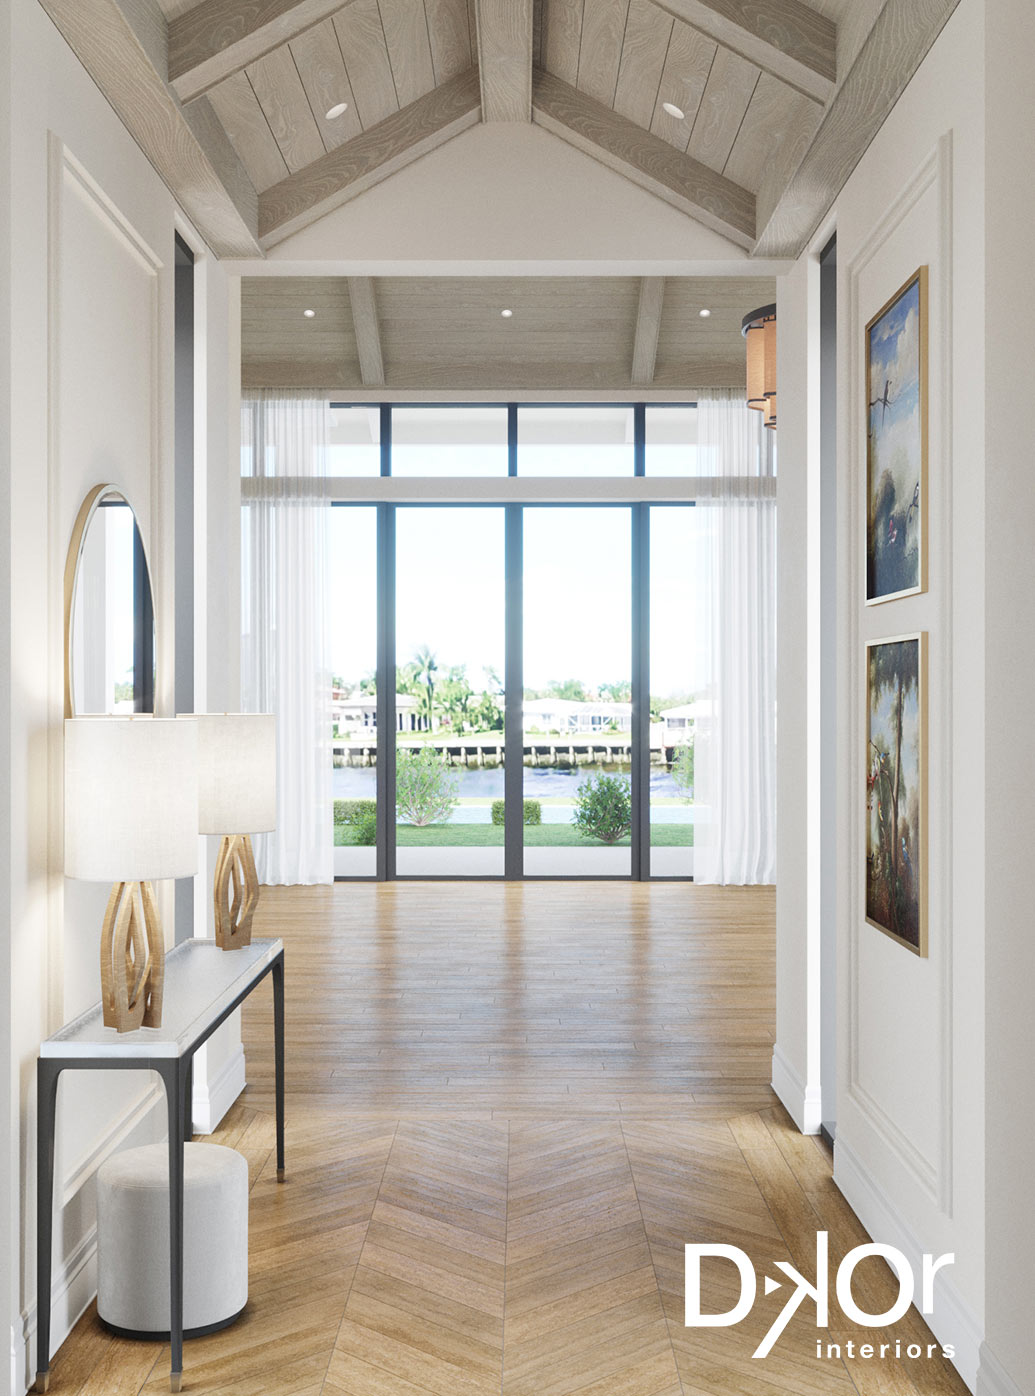 Entry foyer of a residence opening onto the living area with a waterfront view.